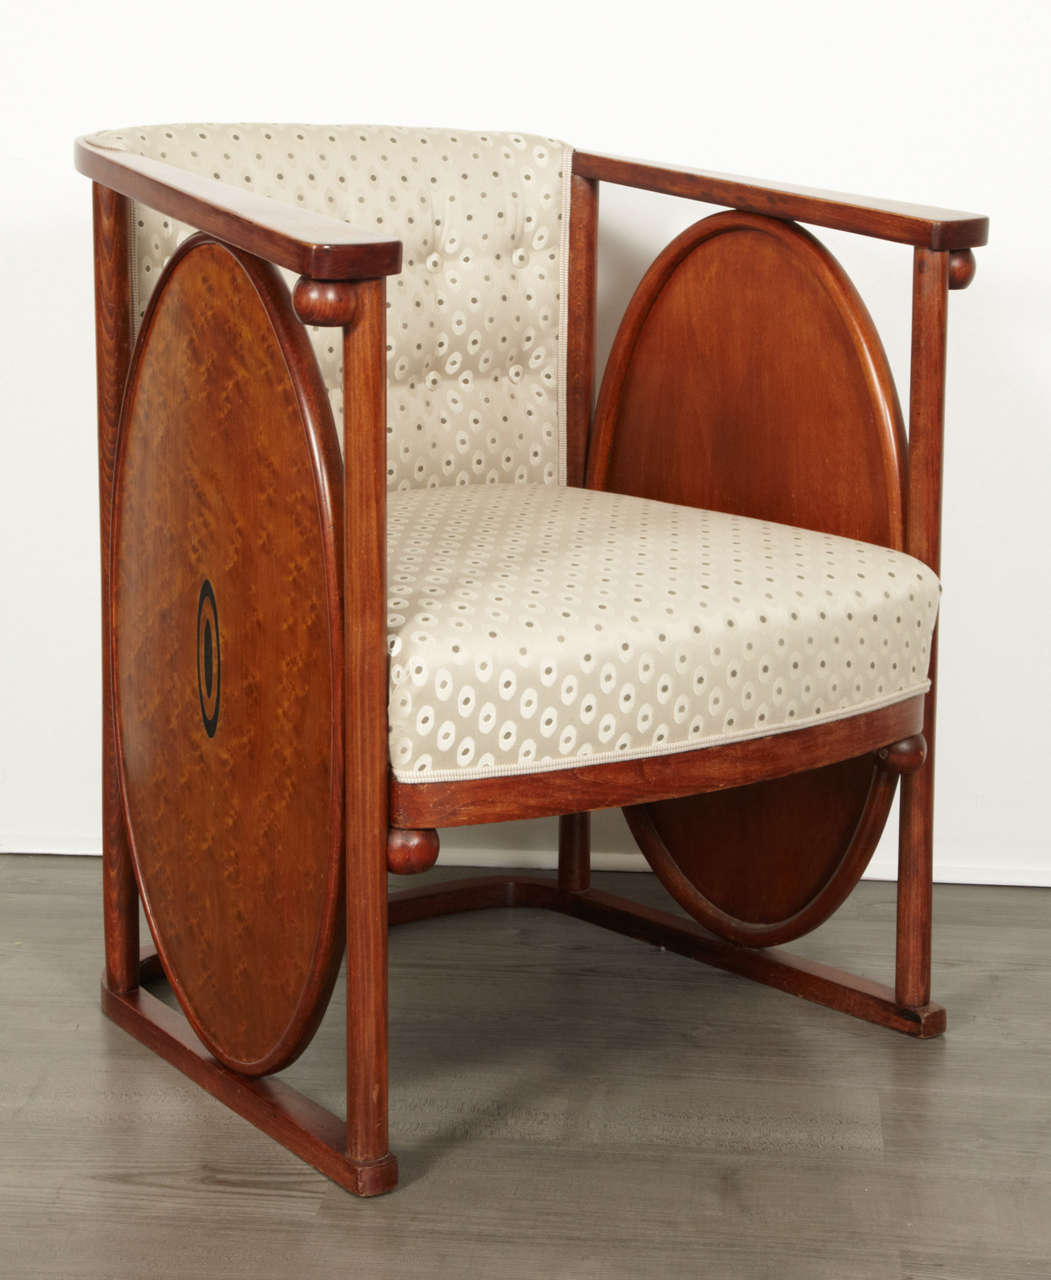 Koloman Moser (1868-1918) and Josef Hoffmann (1870-1956).
Bent and polished beech and plywood, dyed to rosewood, brass inlays, renewed upholstery.
Measures: Height 70 cm (27.5 in.), width 73 cm (28.7 in.), depth 66 cm (26 in.).